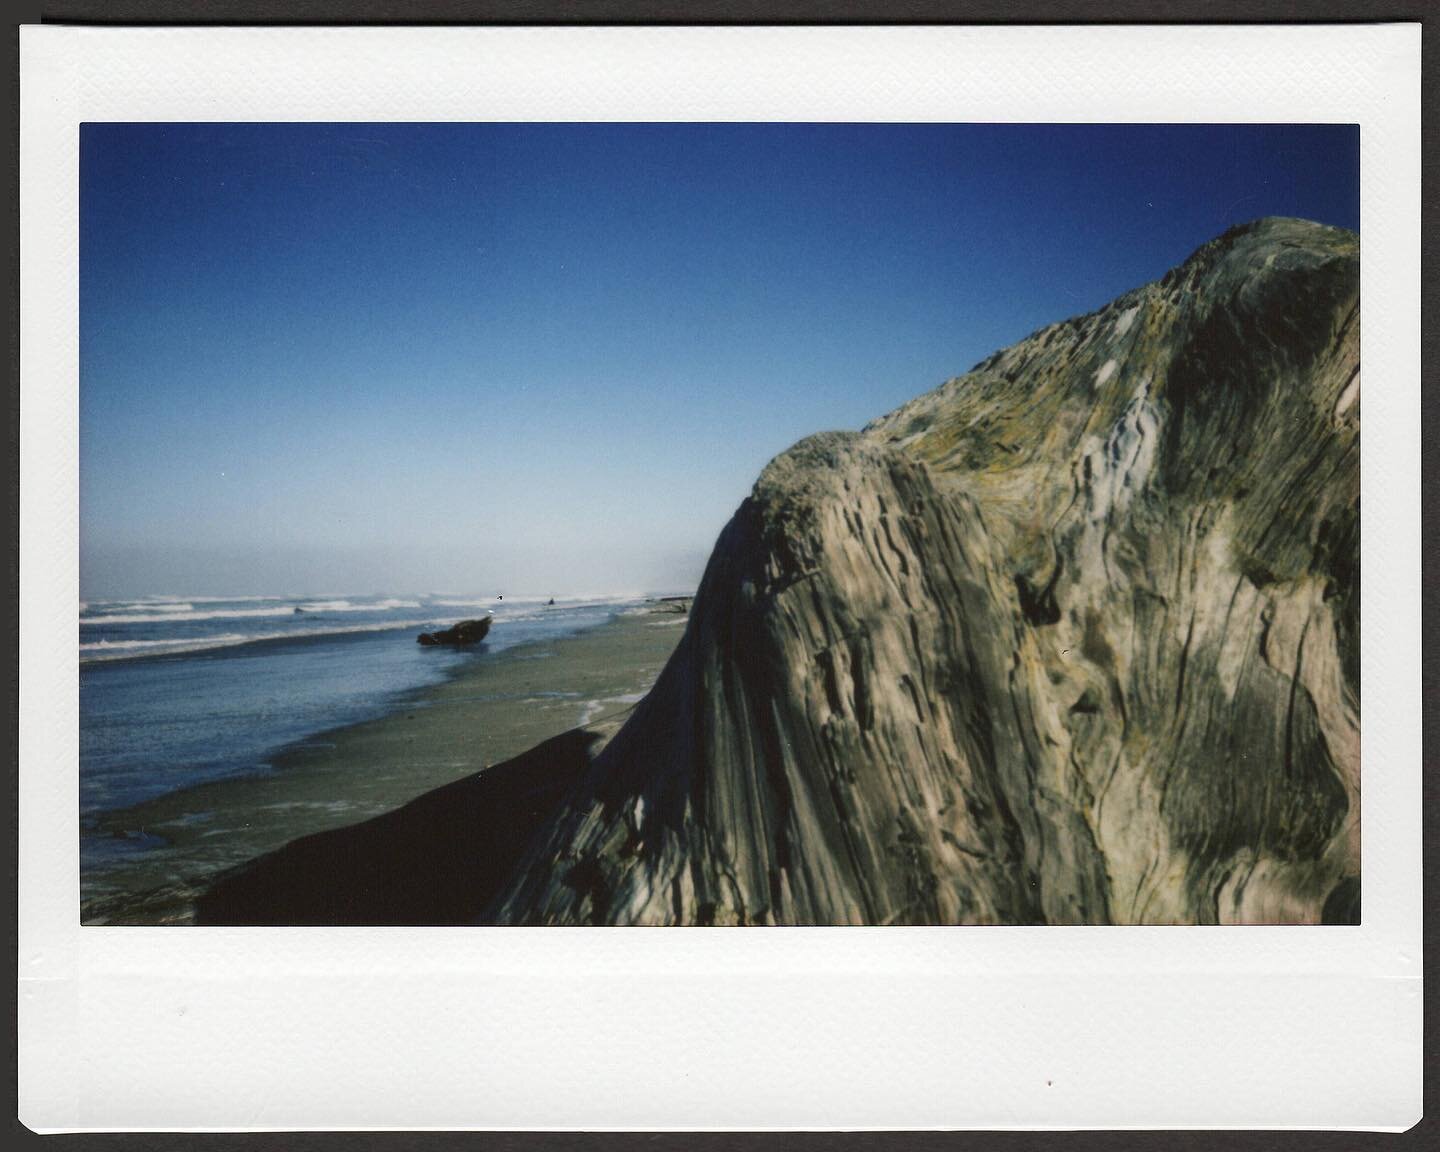 Though I&rsquo;m feeling particularly Liz-Lemon-in-January today (see last image), here is the other batch of #instax photos from our lovely visit to the beach a week ago - this is the #landscapeorientationedition!
&bull;
I hope you all got to enjoy 